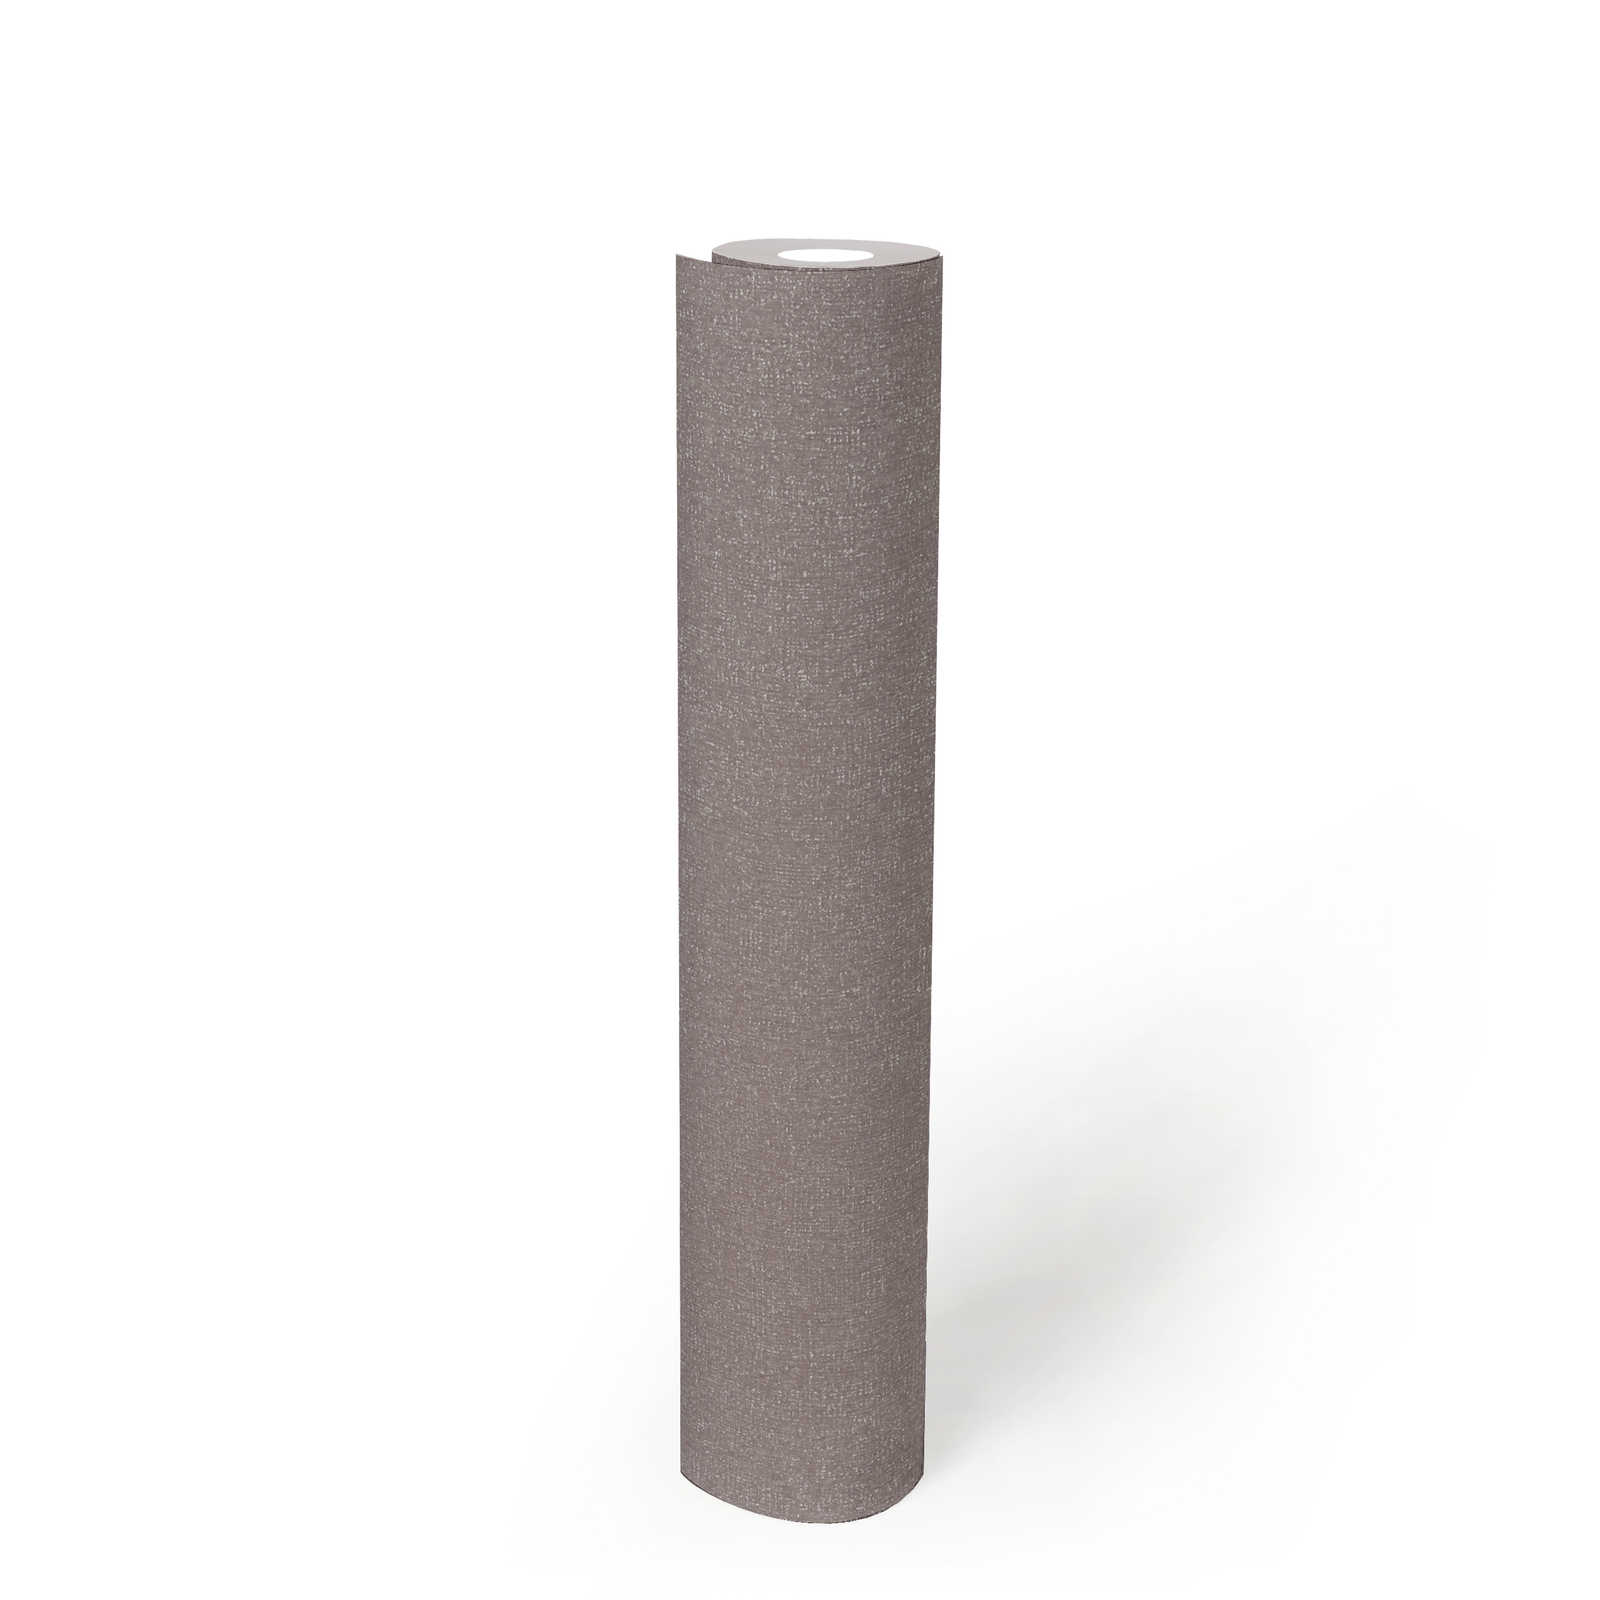             Non-woven wallpaper plains with fine structure - grey, , brown
        